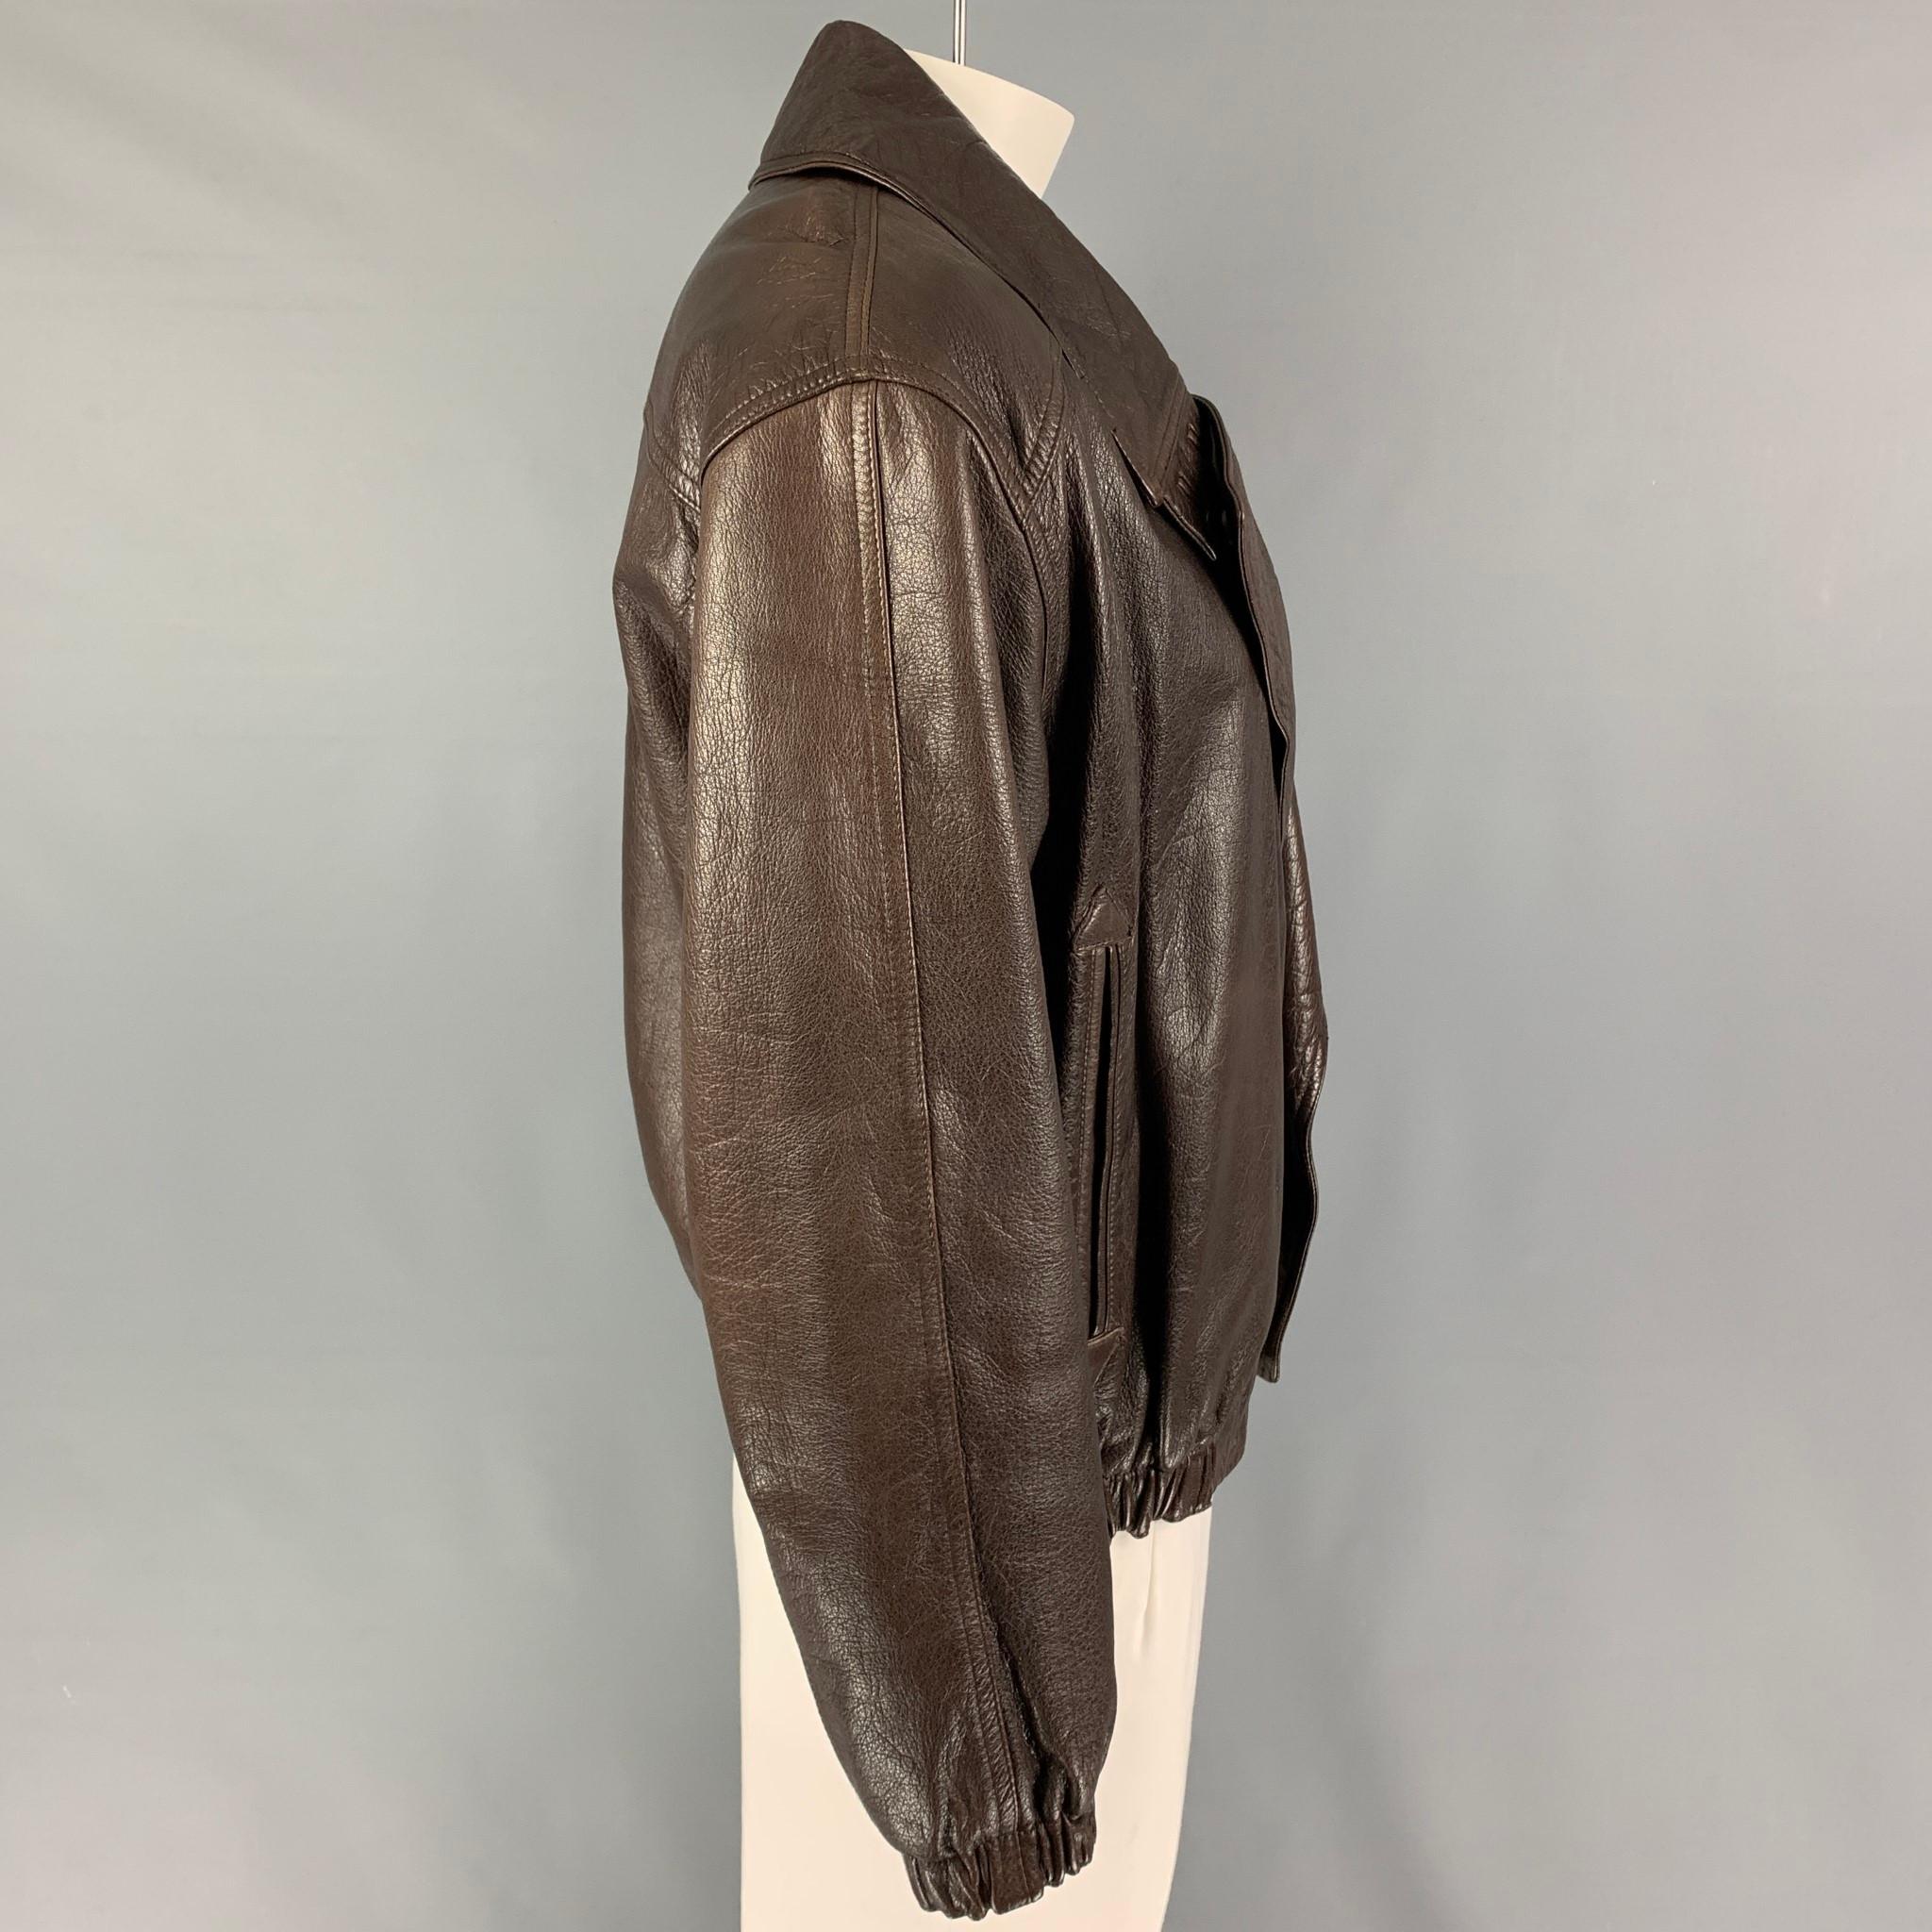 Vintage GIORGIO ARMANI jacket comes in a brown leather featuring a large lapel, slit pockets, elastic hem, and a single breasted closure. 

Good Pre-Owned Condition. Light wear. As-Is.
Marked: Size tag removed.

Measurements:

Shoulder: 22.5